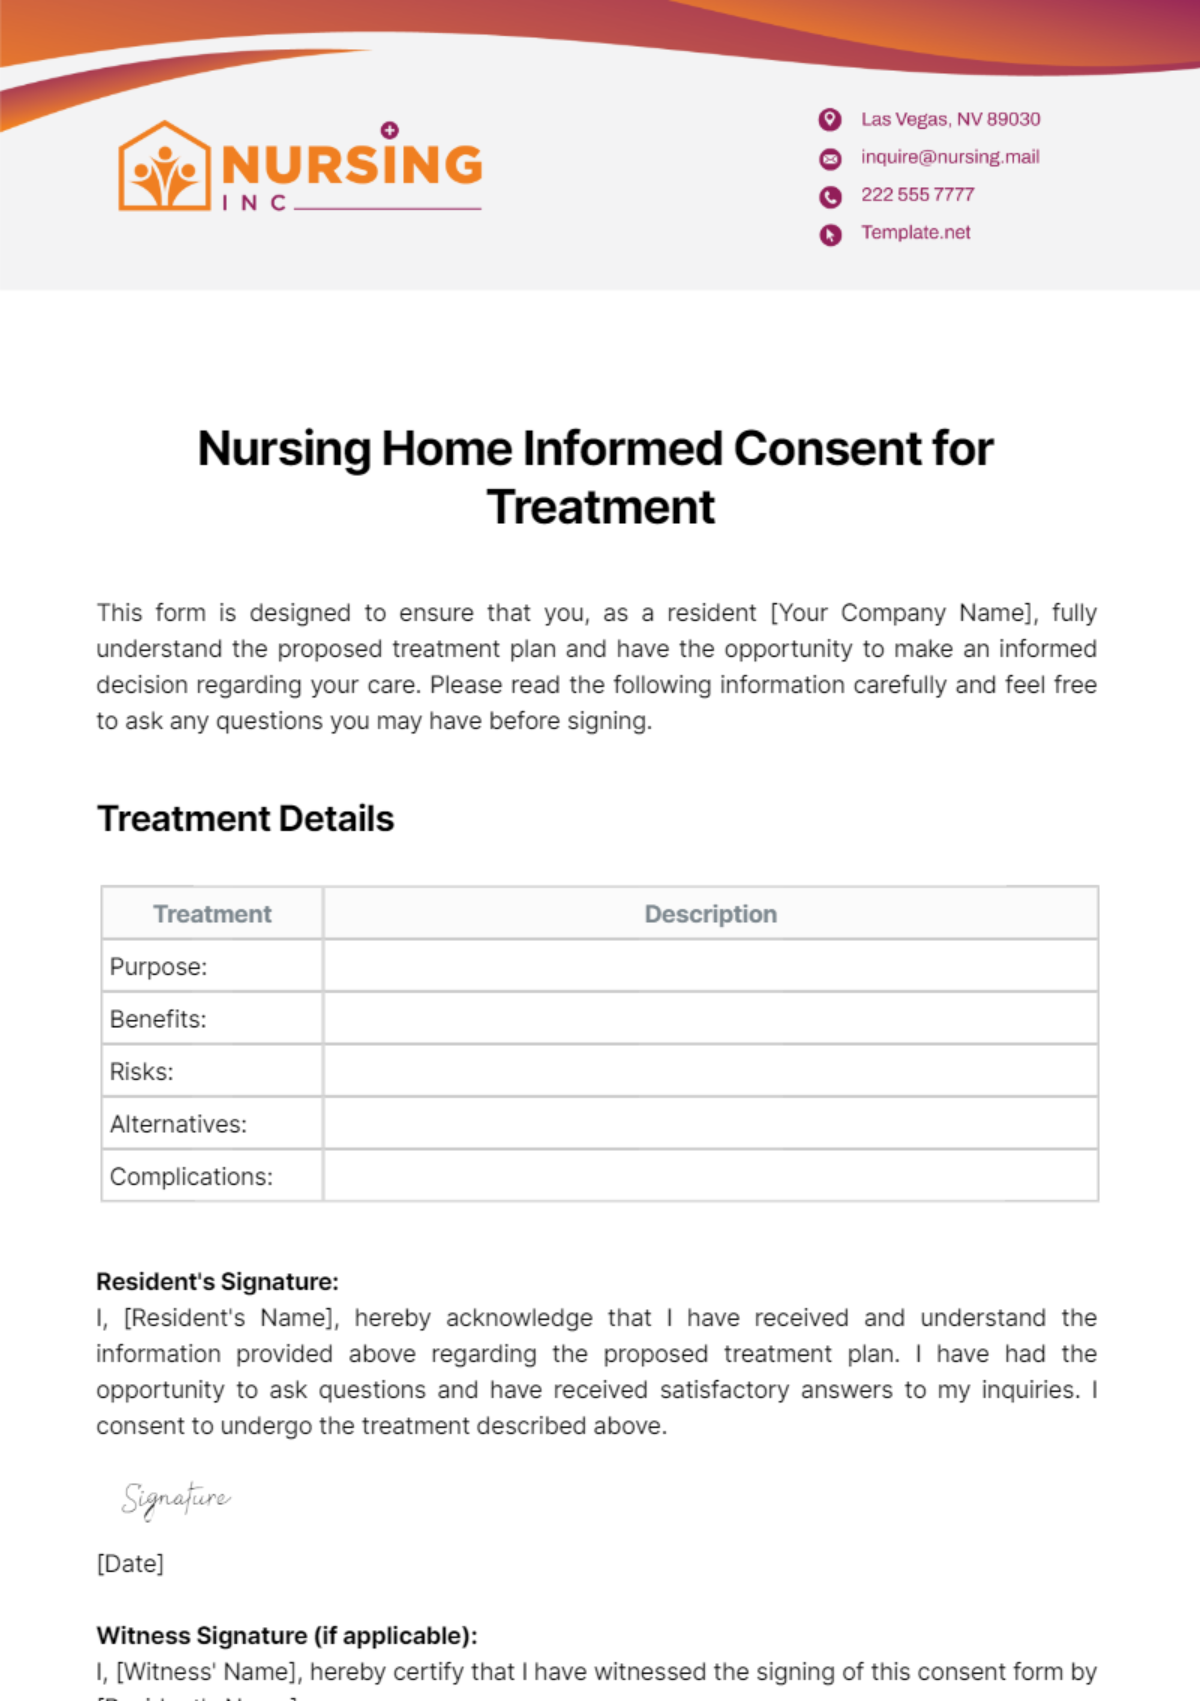 Nursing Home Informed Consent for Treatment Template